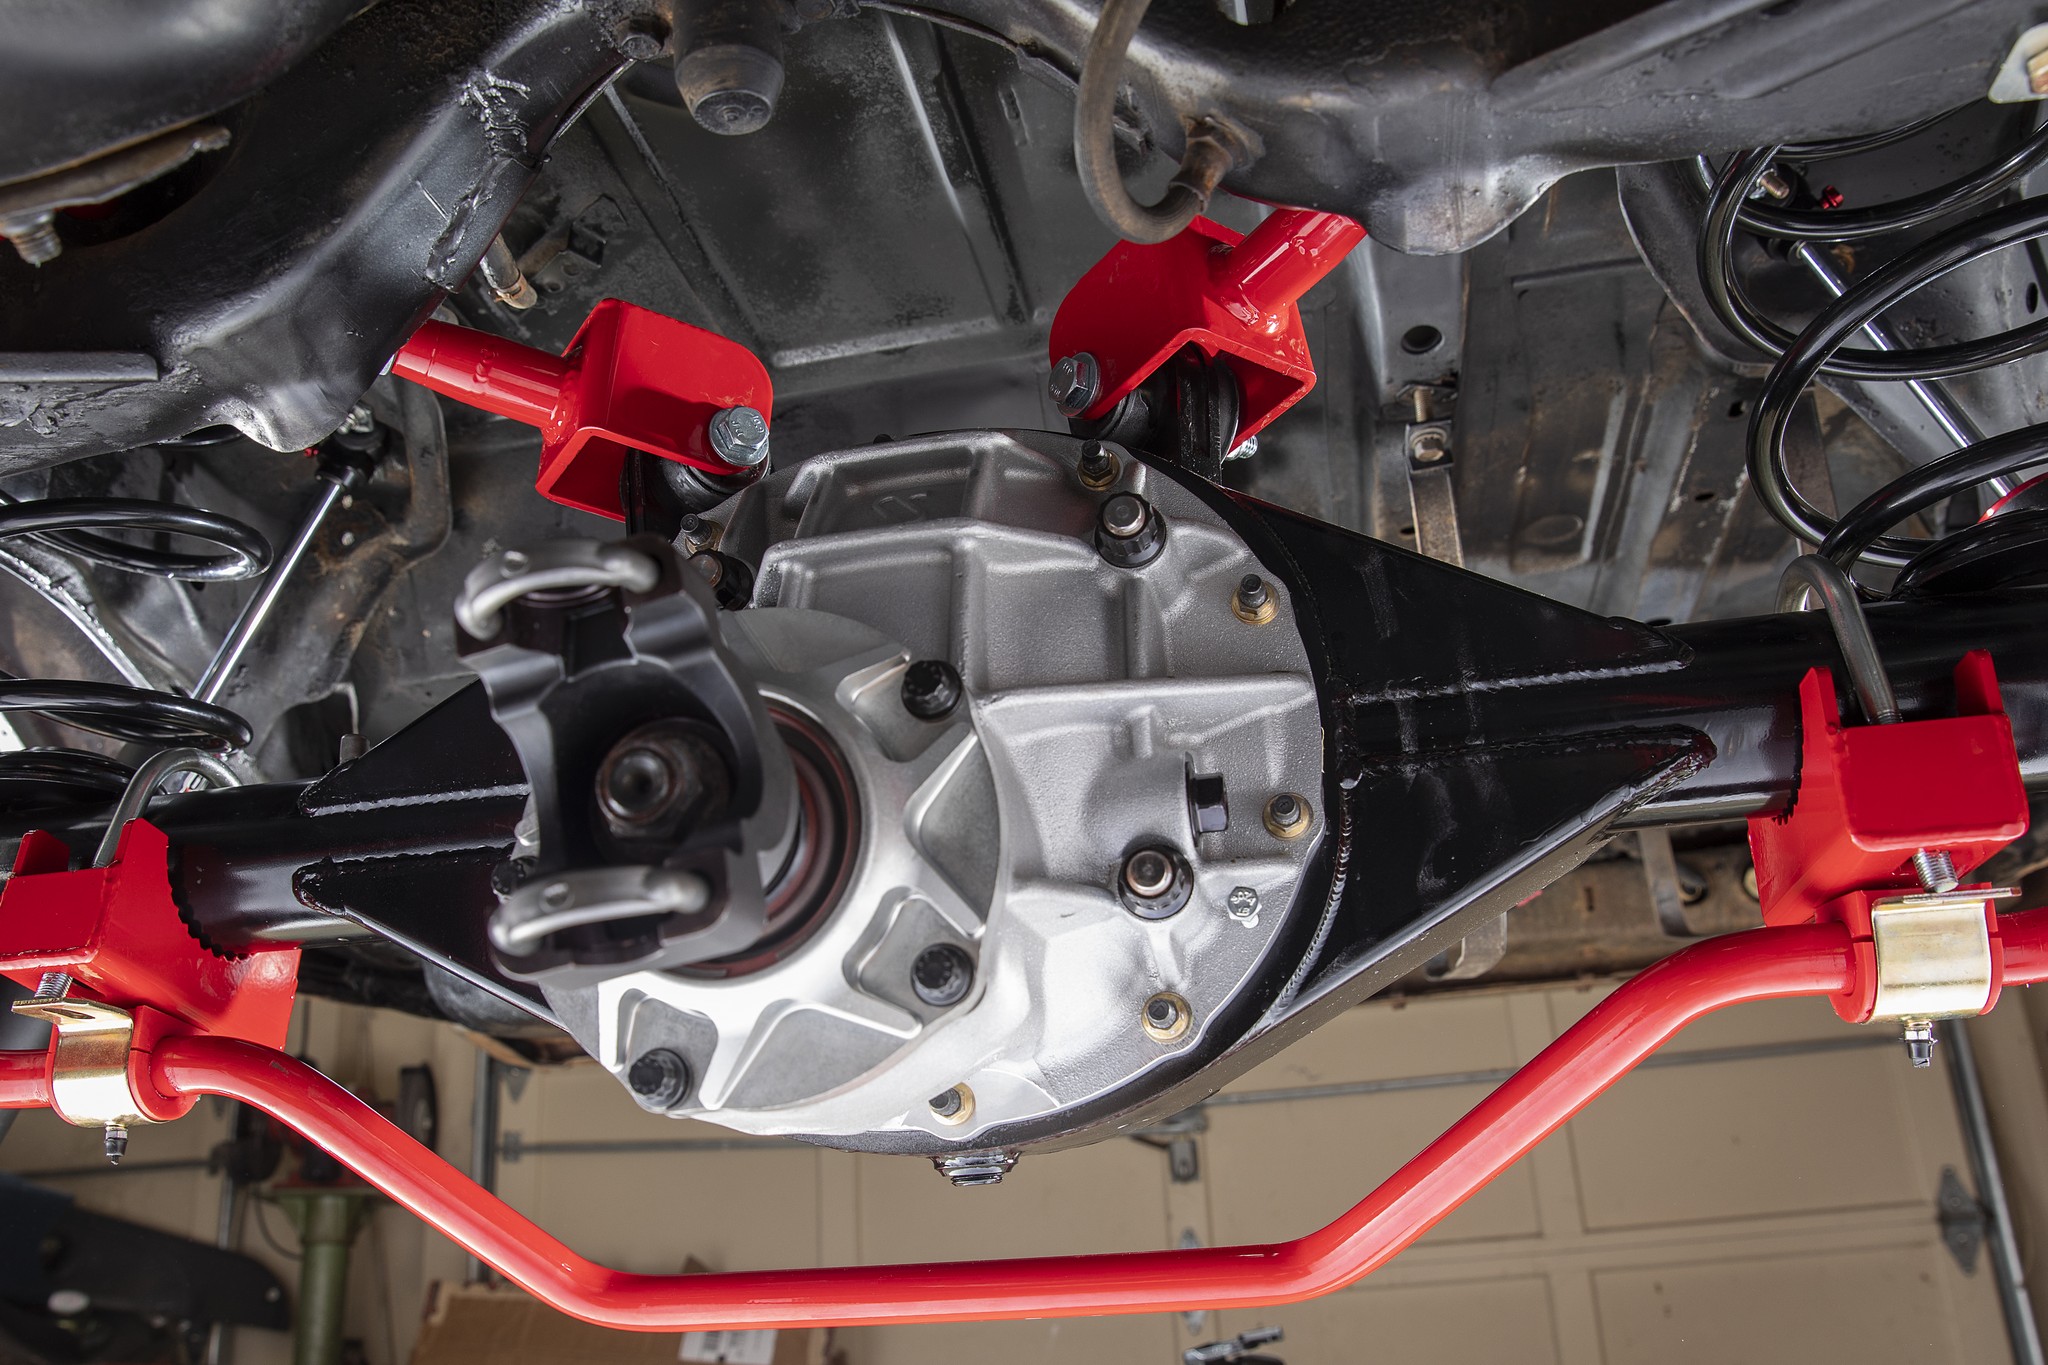 G-Body Rear Suspension Overhaul With UMI Performance - UMI Performance Inc.